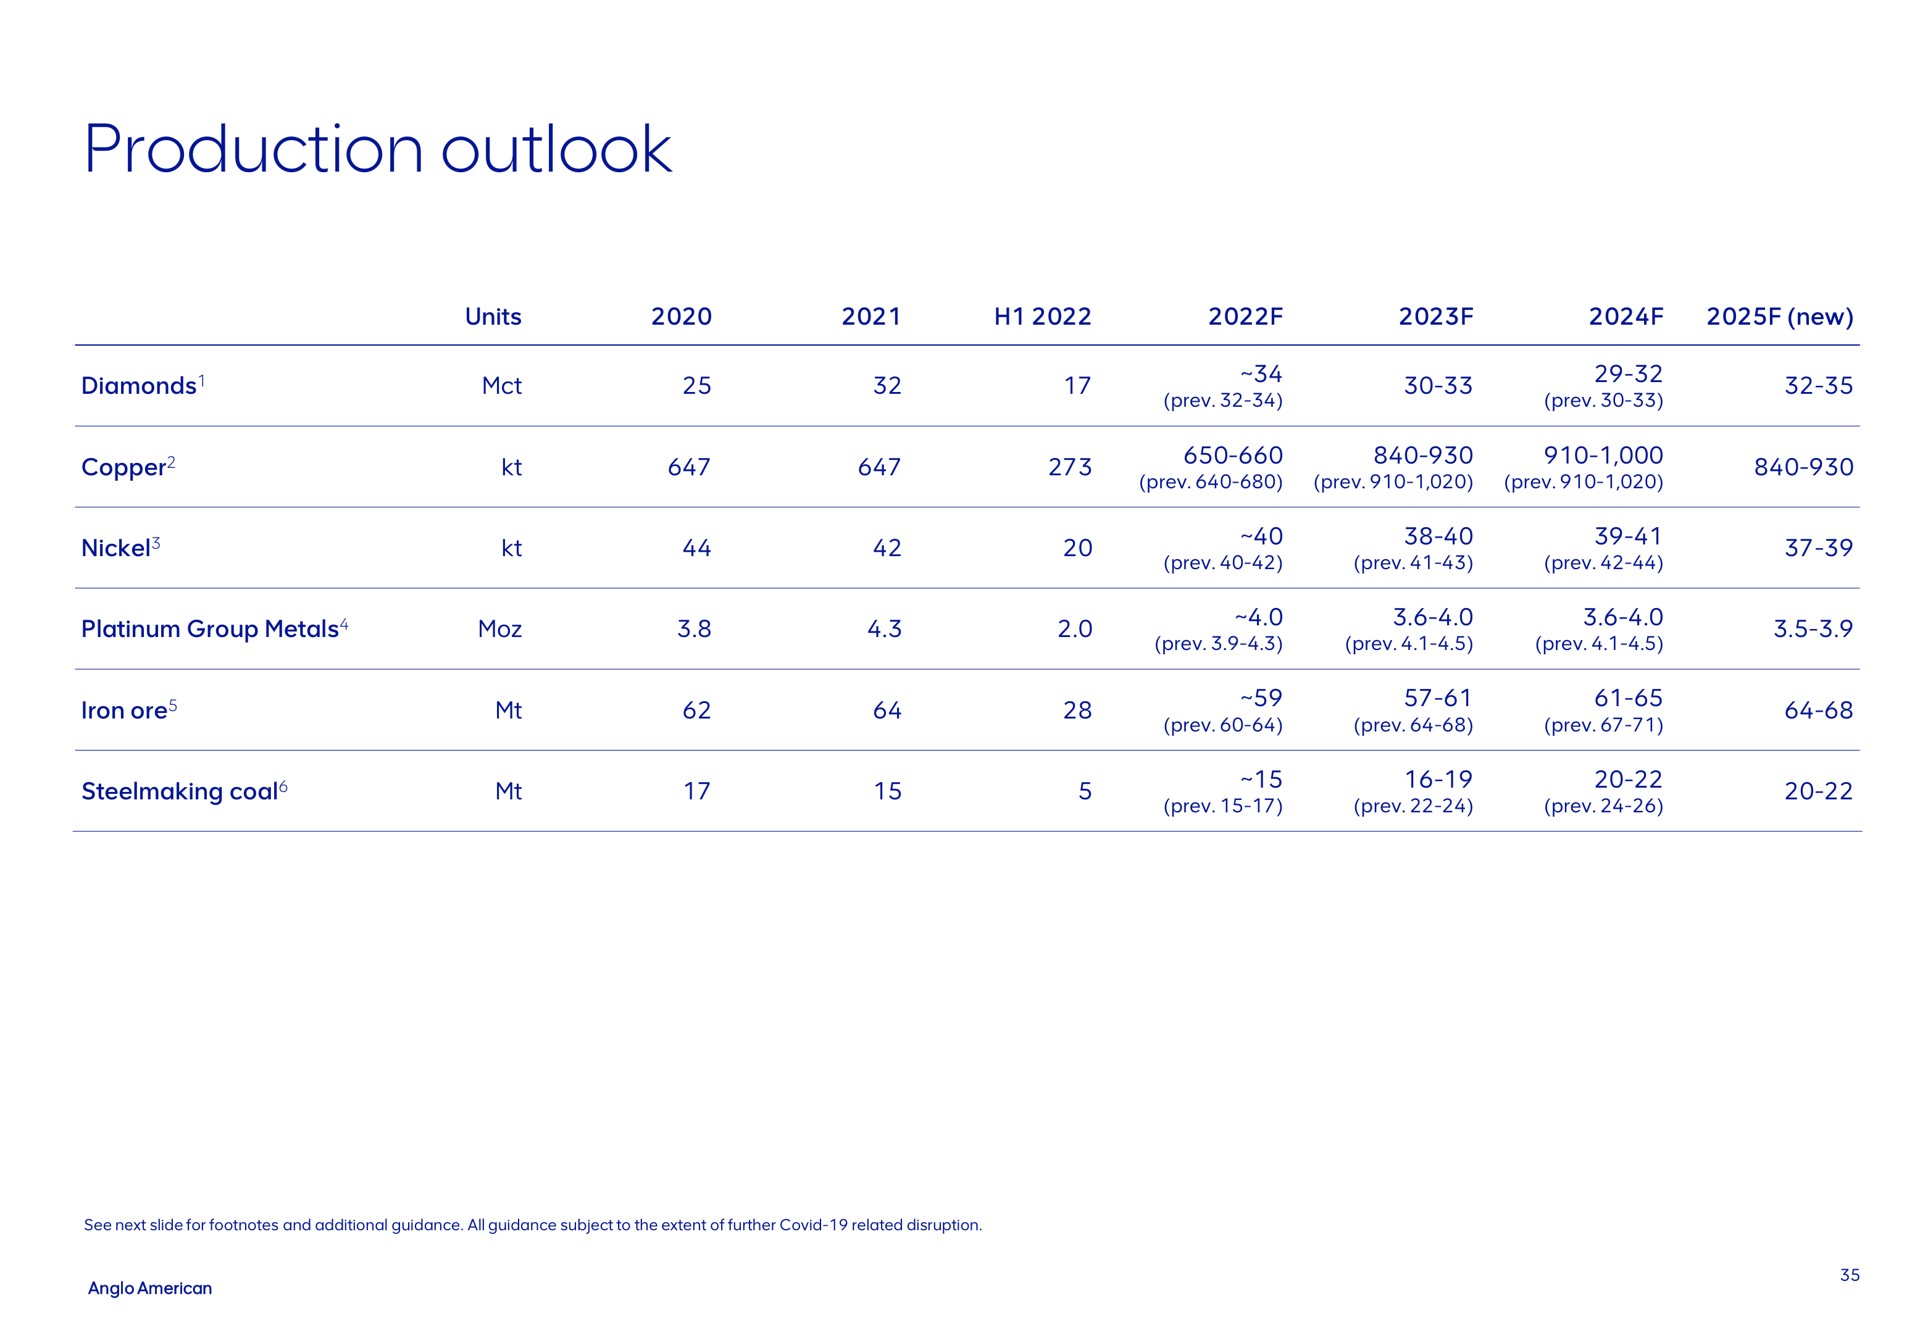 production outlook copper | AngloAmerican